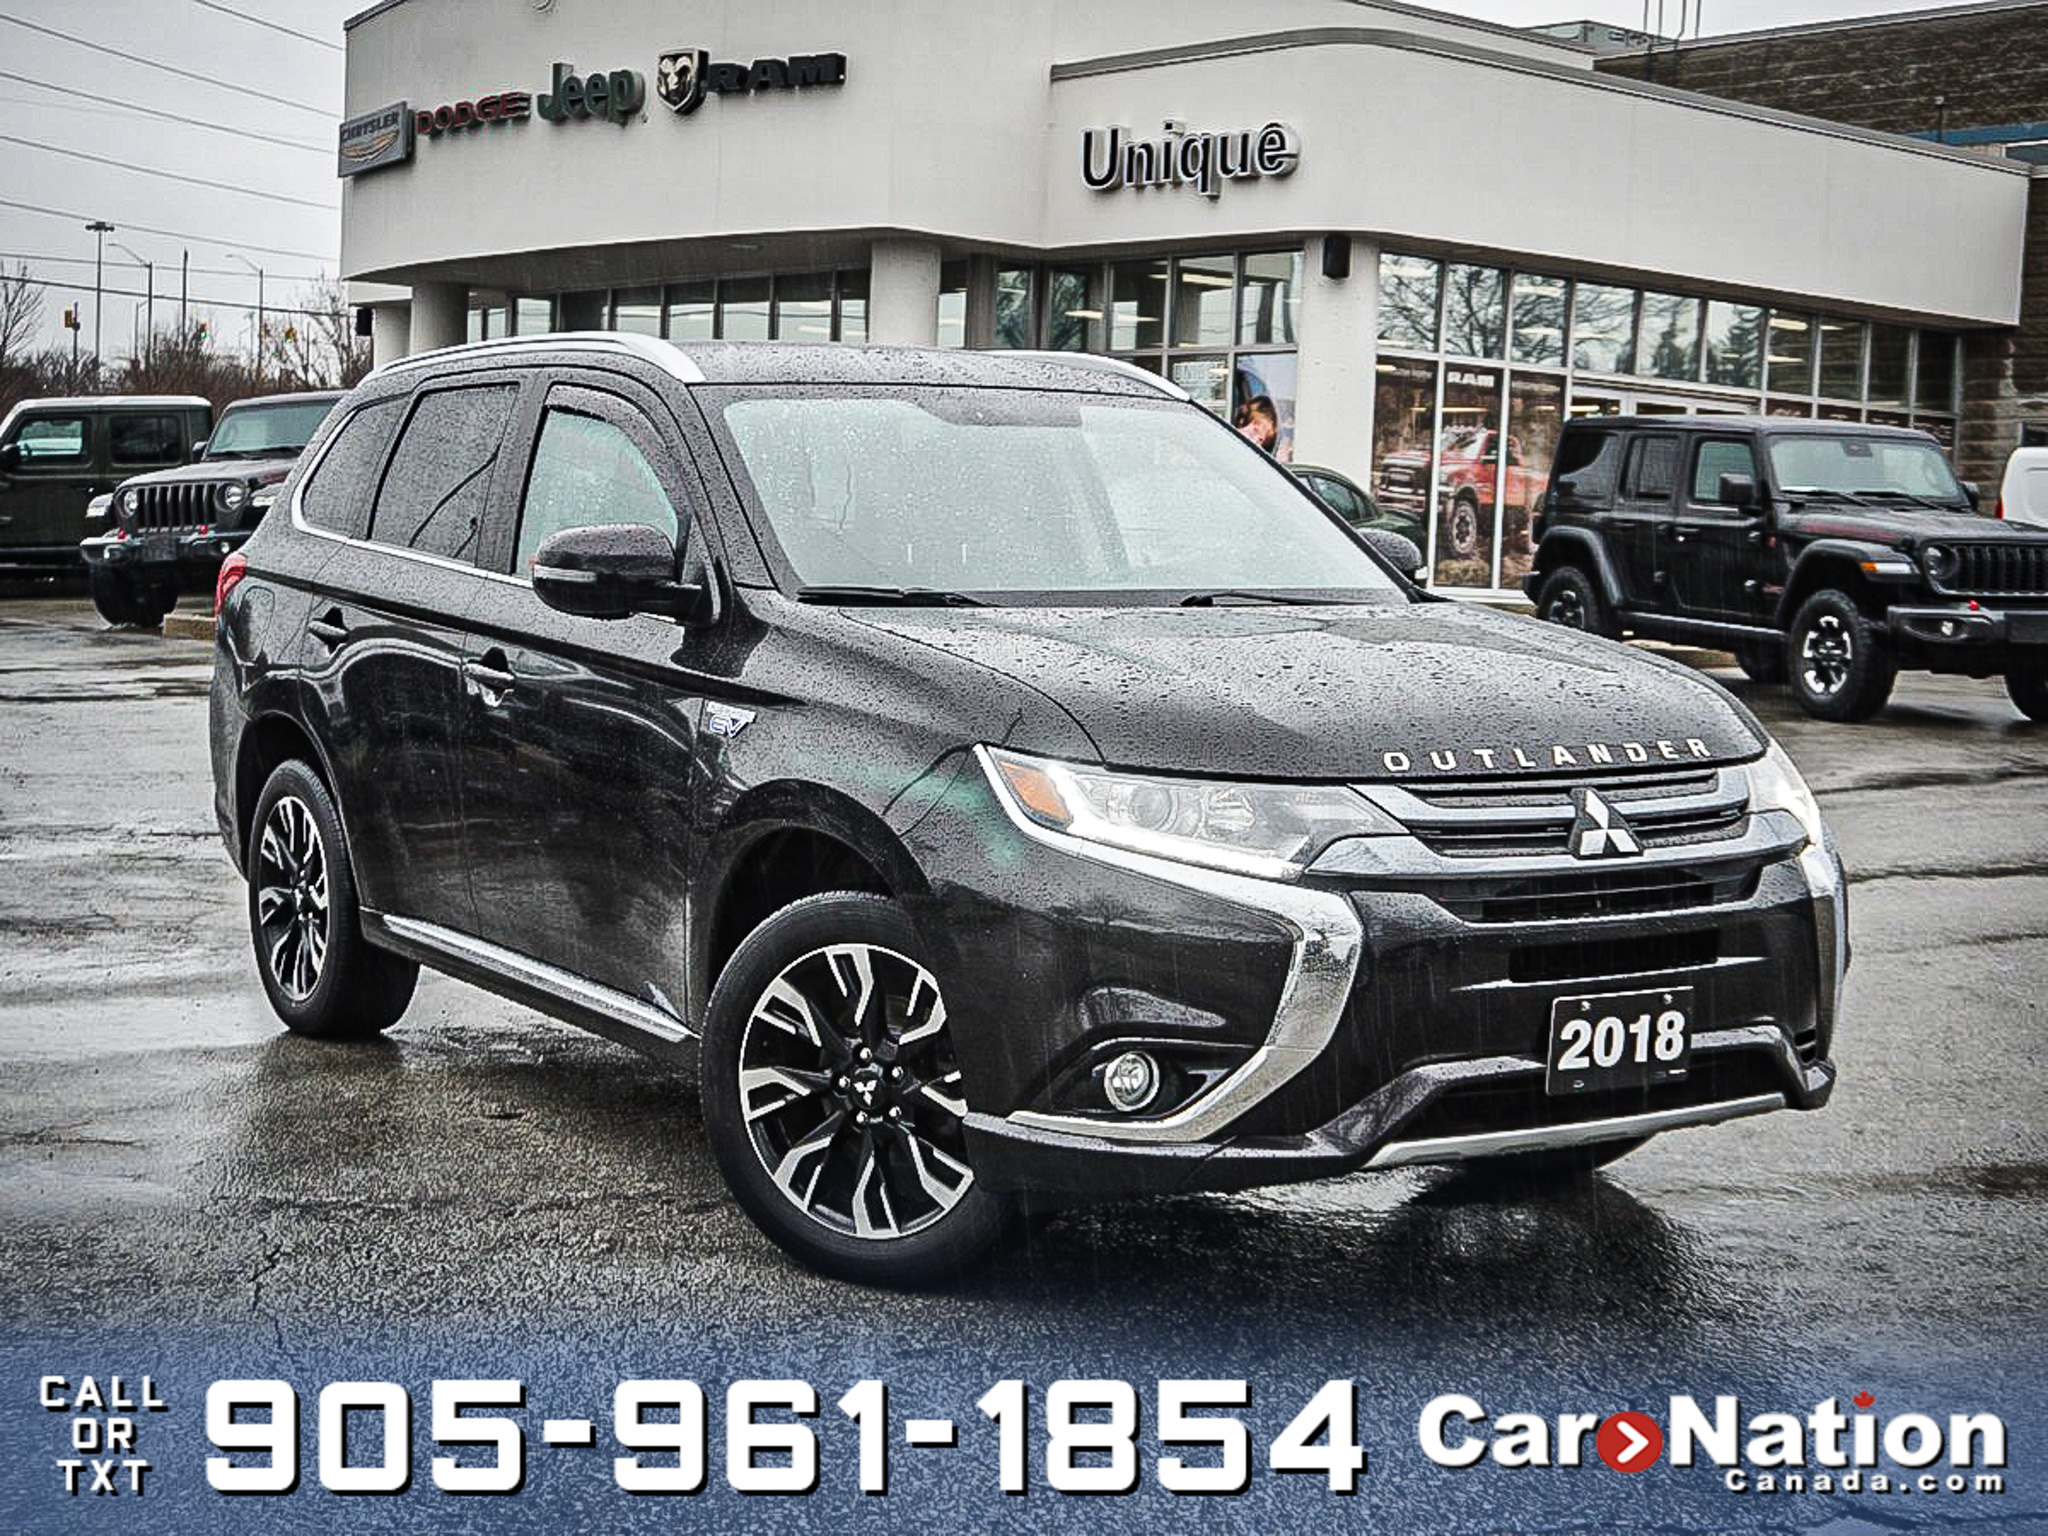 2018 Mitsubishi Outlander PHEV SE S-AWC| LEATHER-TRIMMED SEATS| HEATED SEATS| 